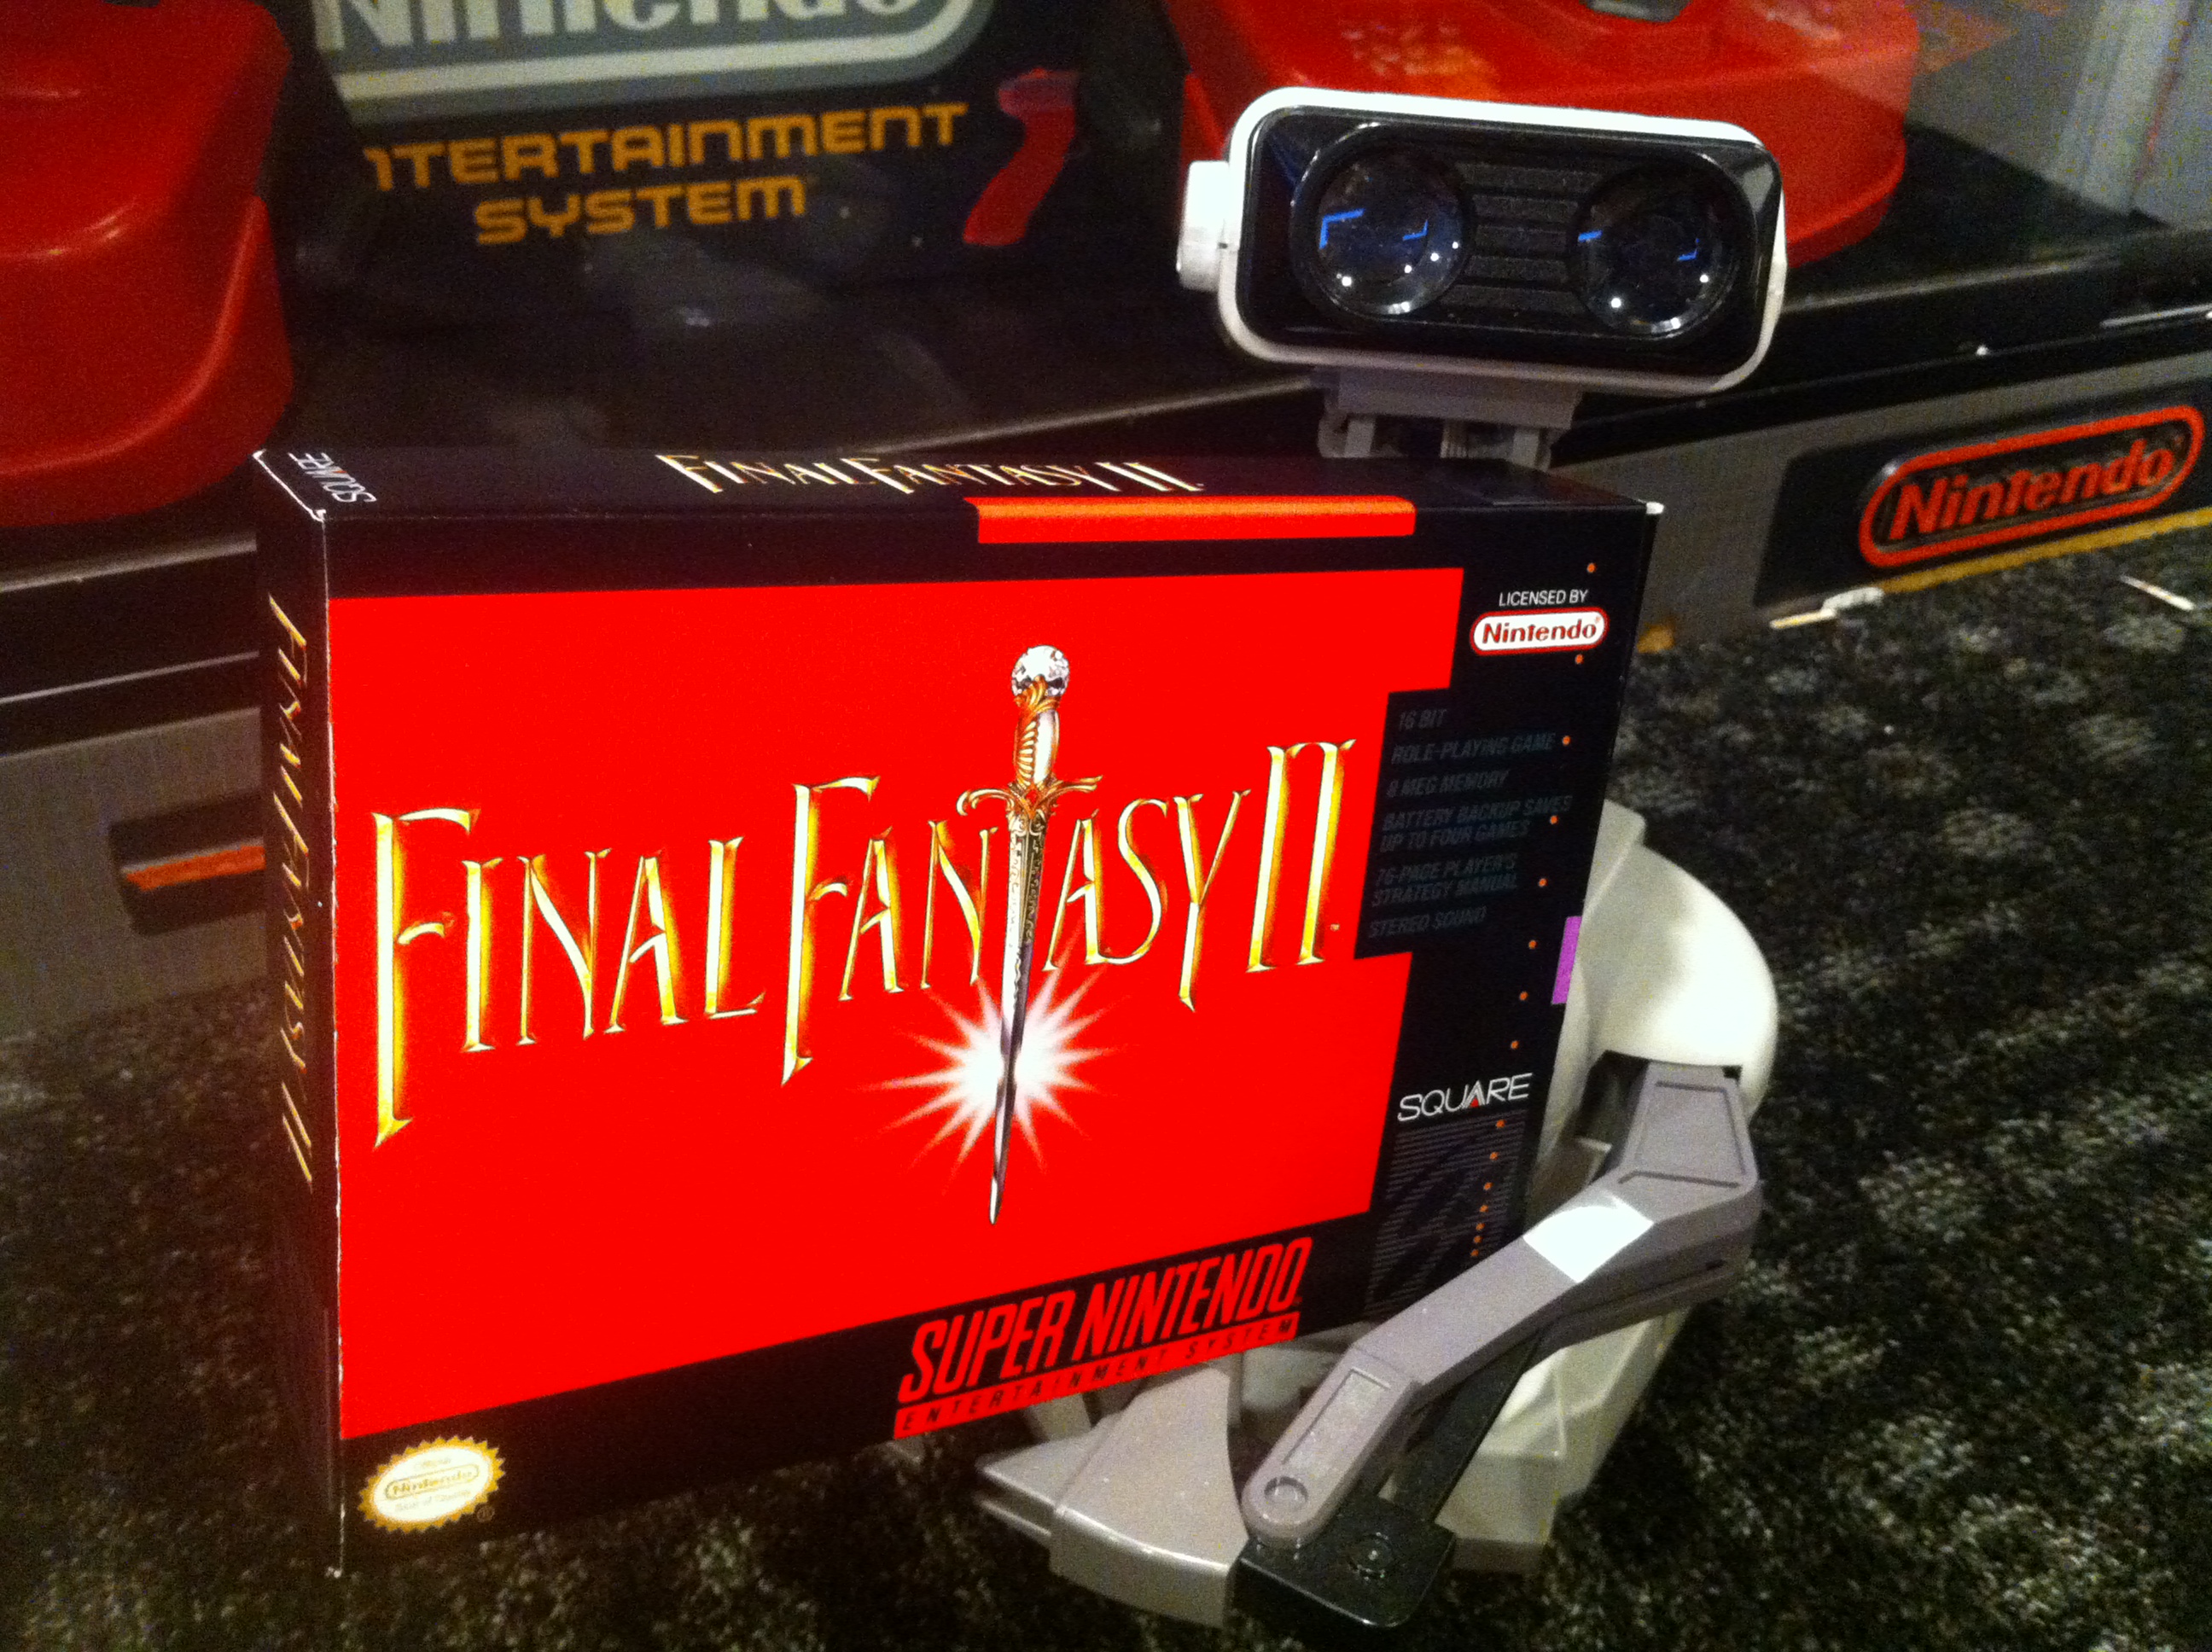 snes-final-fantasy-ii-snes-boxbox-my-games-reproduction-game-boxes